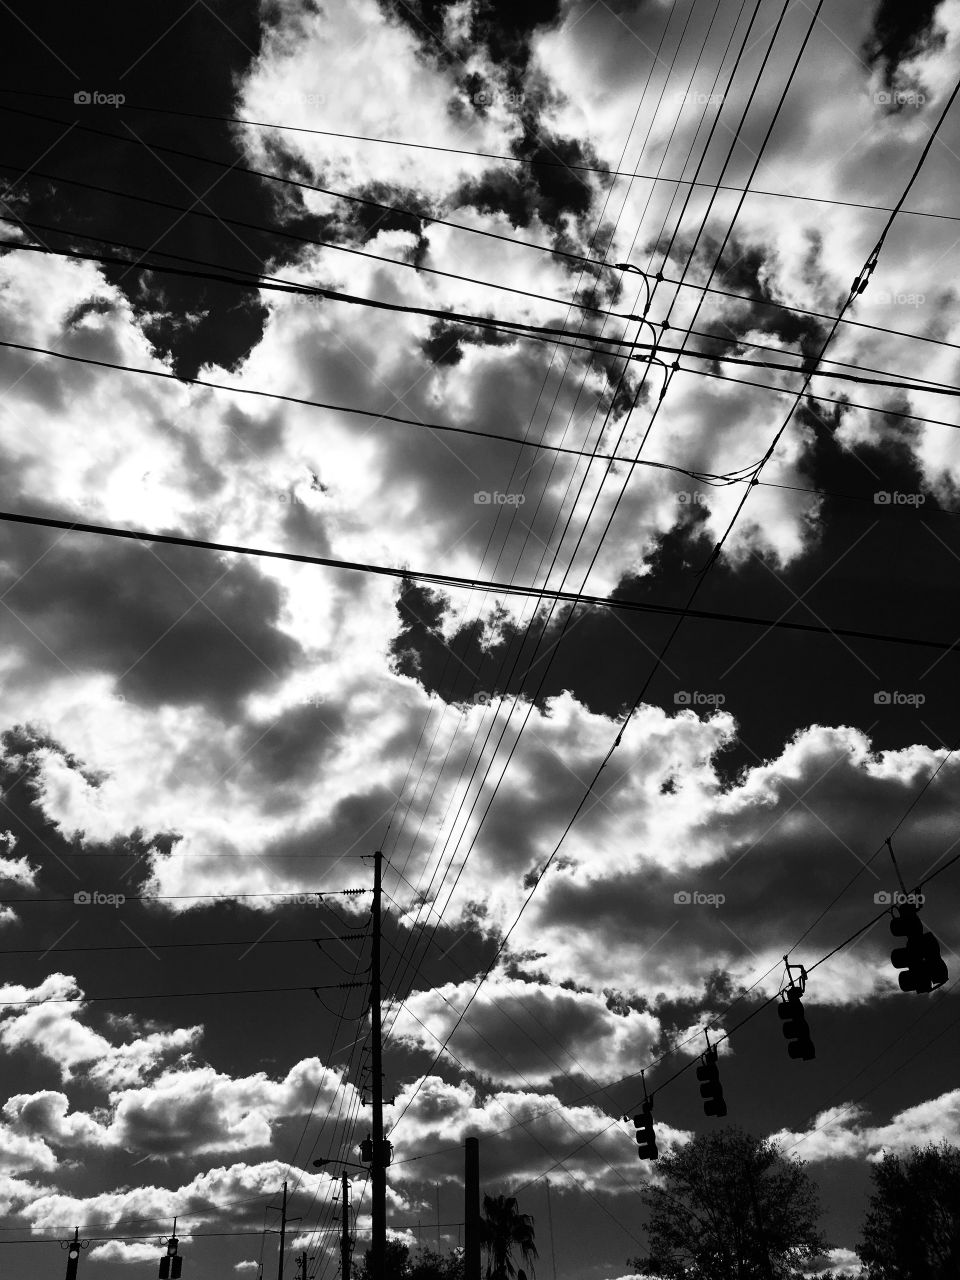 Clouds and power lines in noir et blanc in Florida 